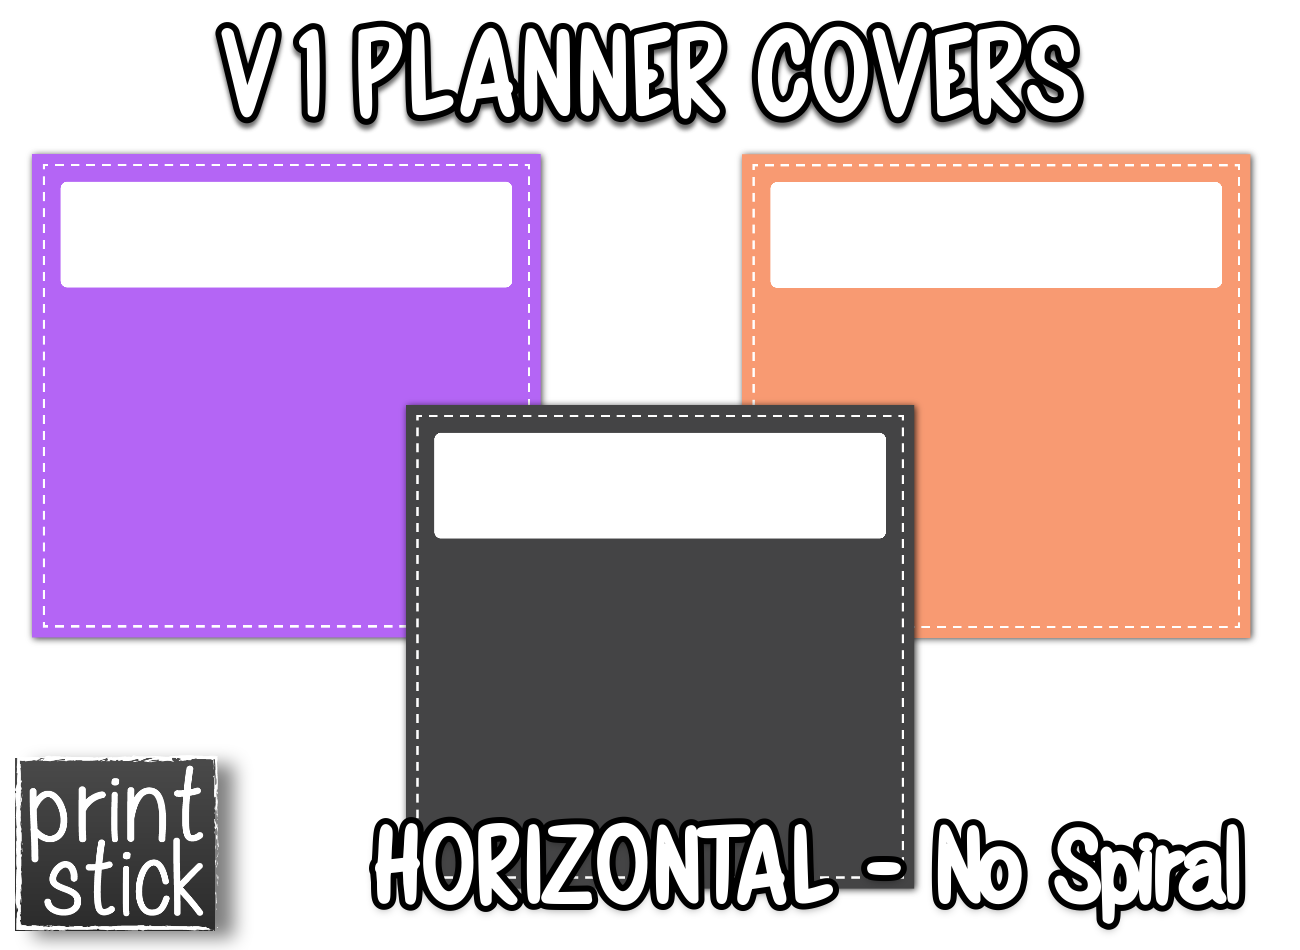 Covers for Planners - V1 - Print Stick